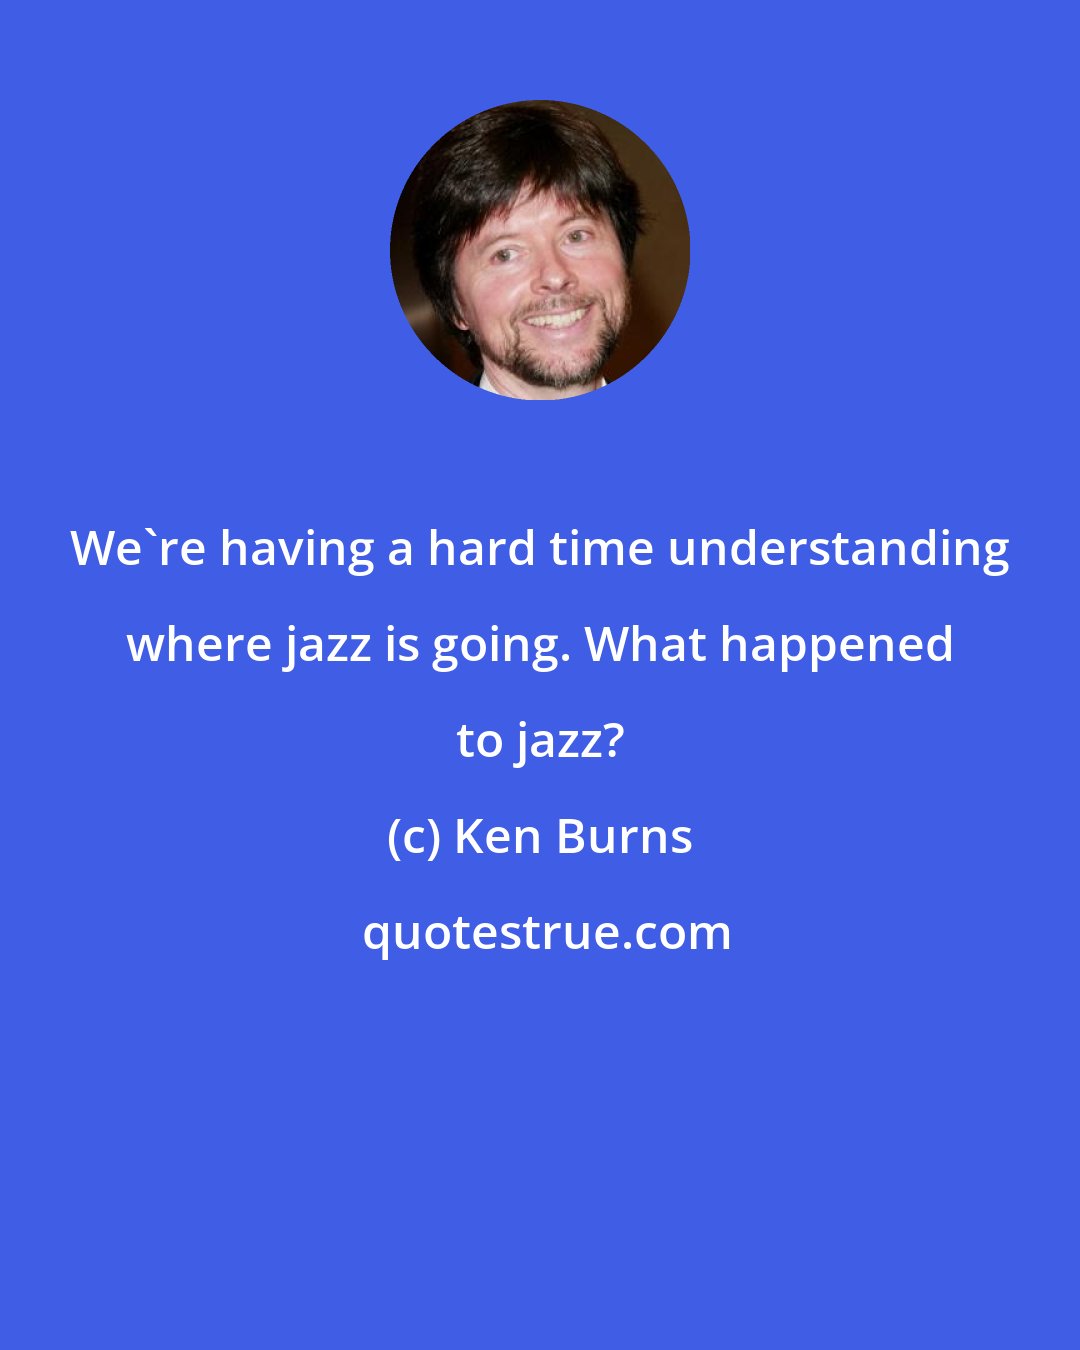 Ken Burns: We're having a hard time understanding where jazz is going. What happened to jazz?